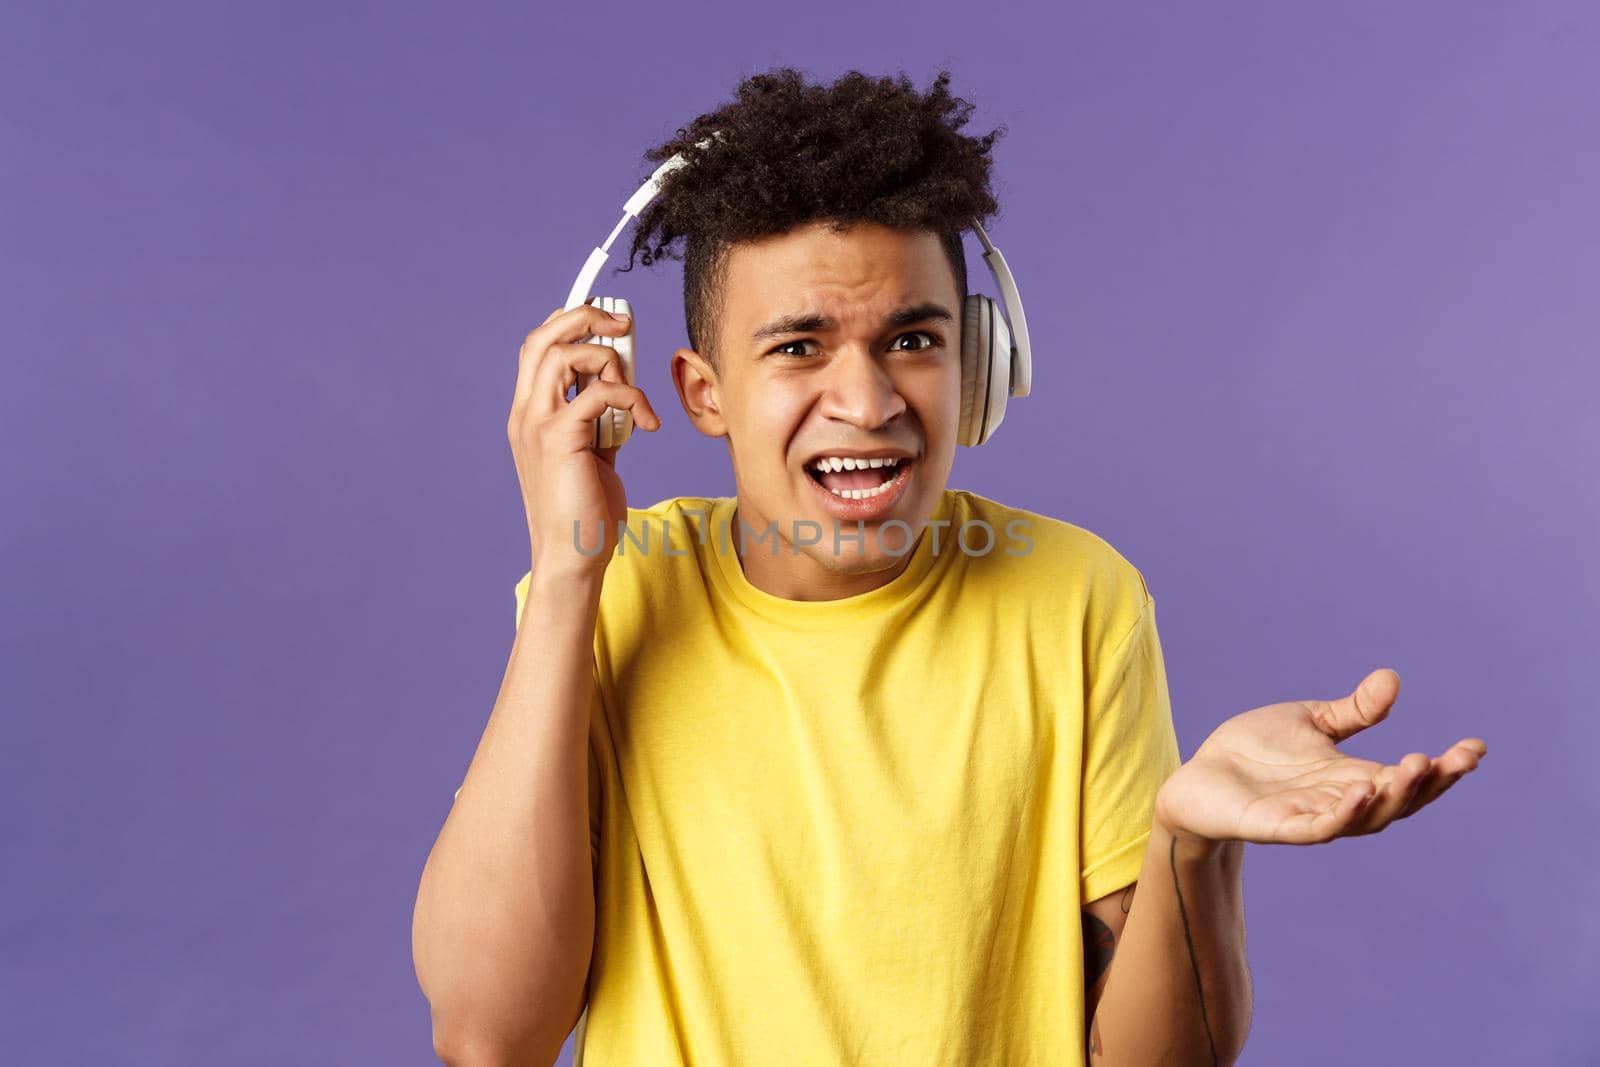 What do you want, I am in headphones. Portrait of confused annoyed young man shrugging, take-off earphone to hear what person asked while he was listening music, purple background by Benzoix